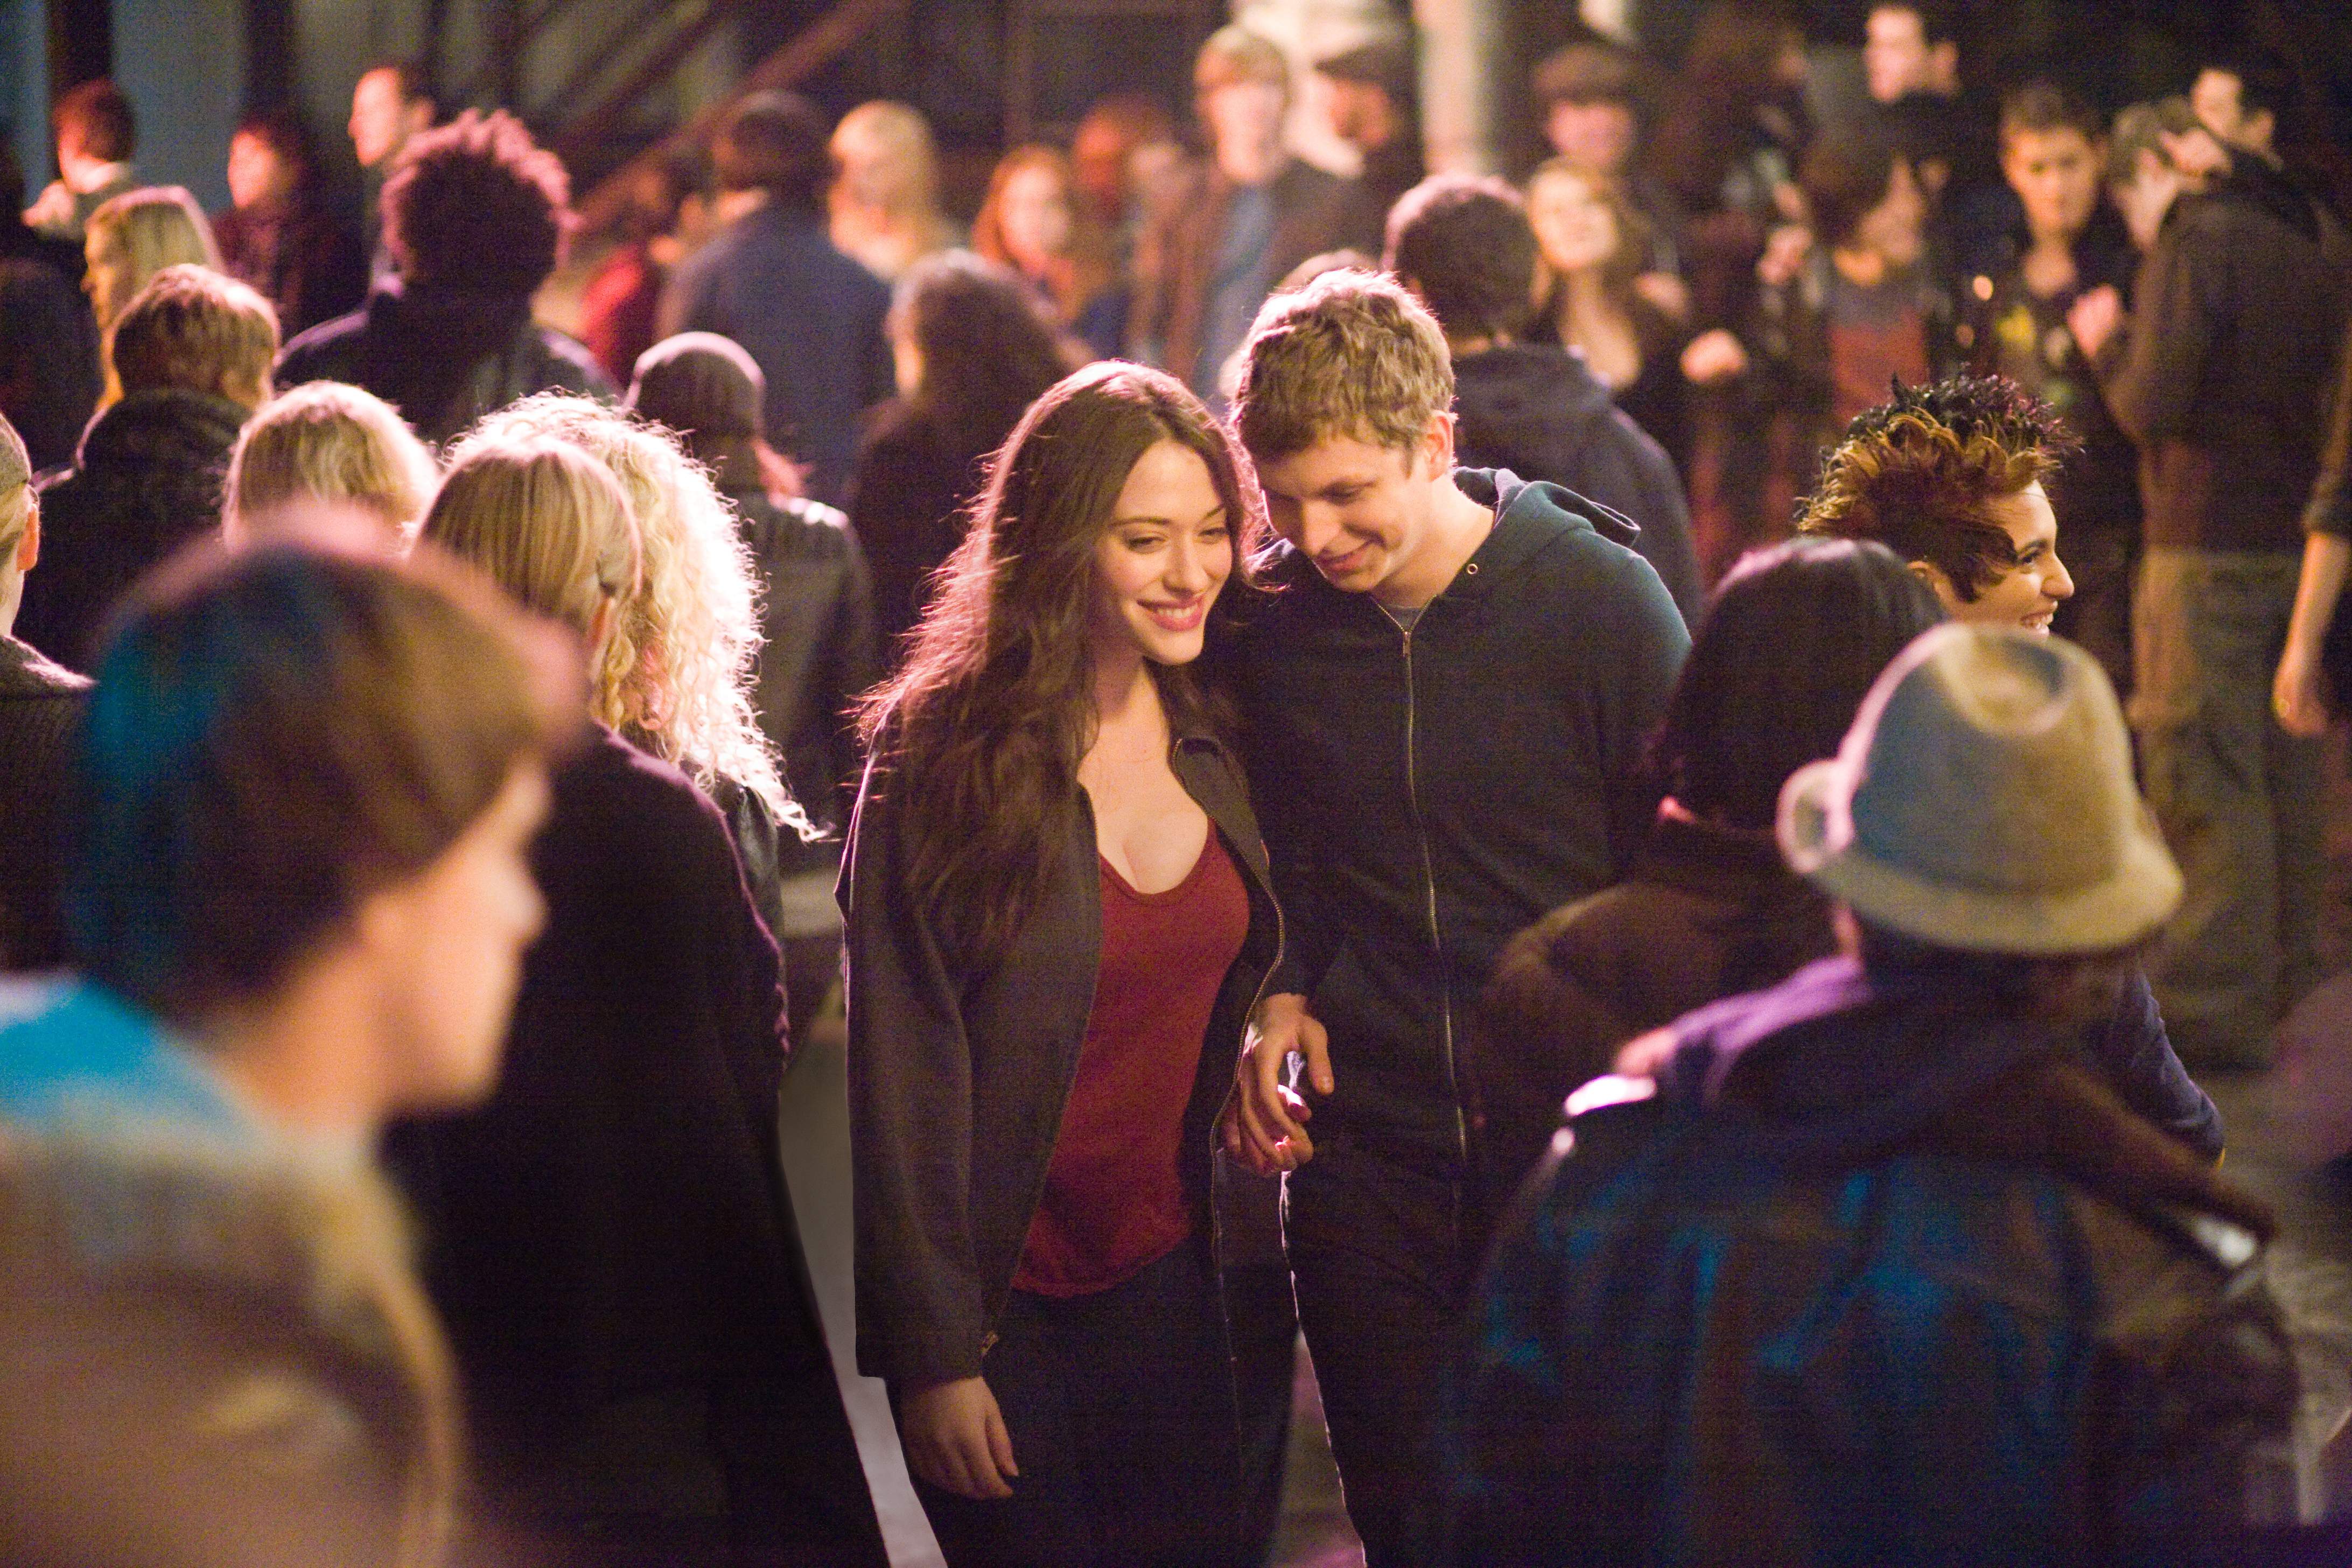 Kat Dennings (center left) and Michael Cera (center right) star in Screen Gems' and Mandate Pictures' comedy NICK AND NORAH'S INFINITE PLAYLIST. Photo By:  K.C. Bailey.